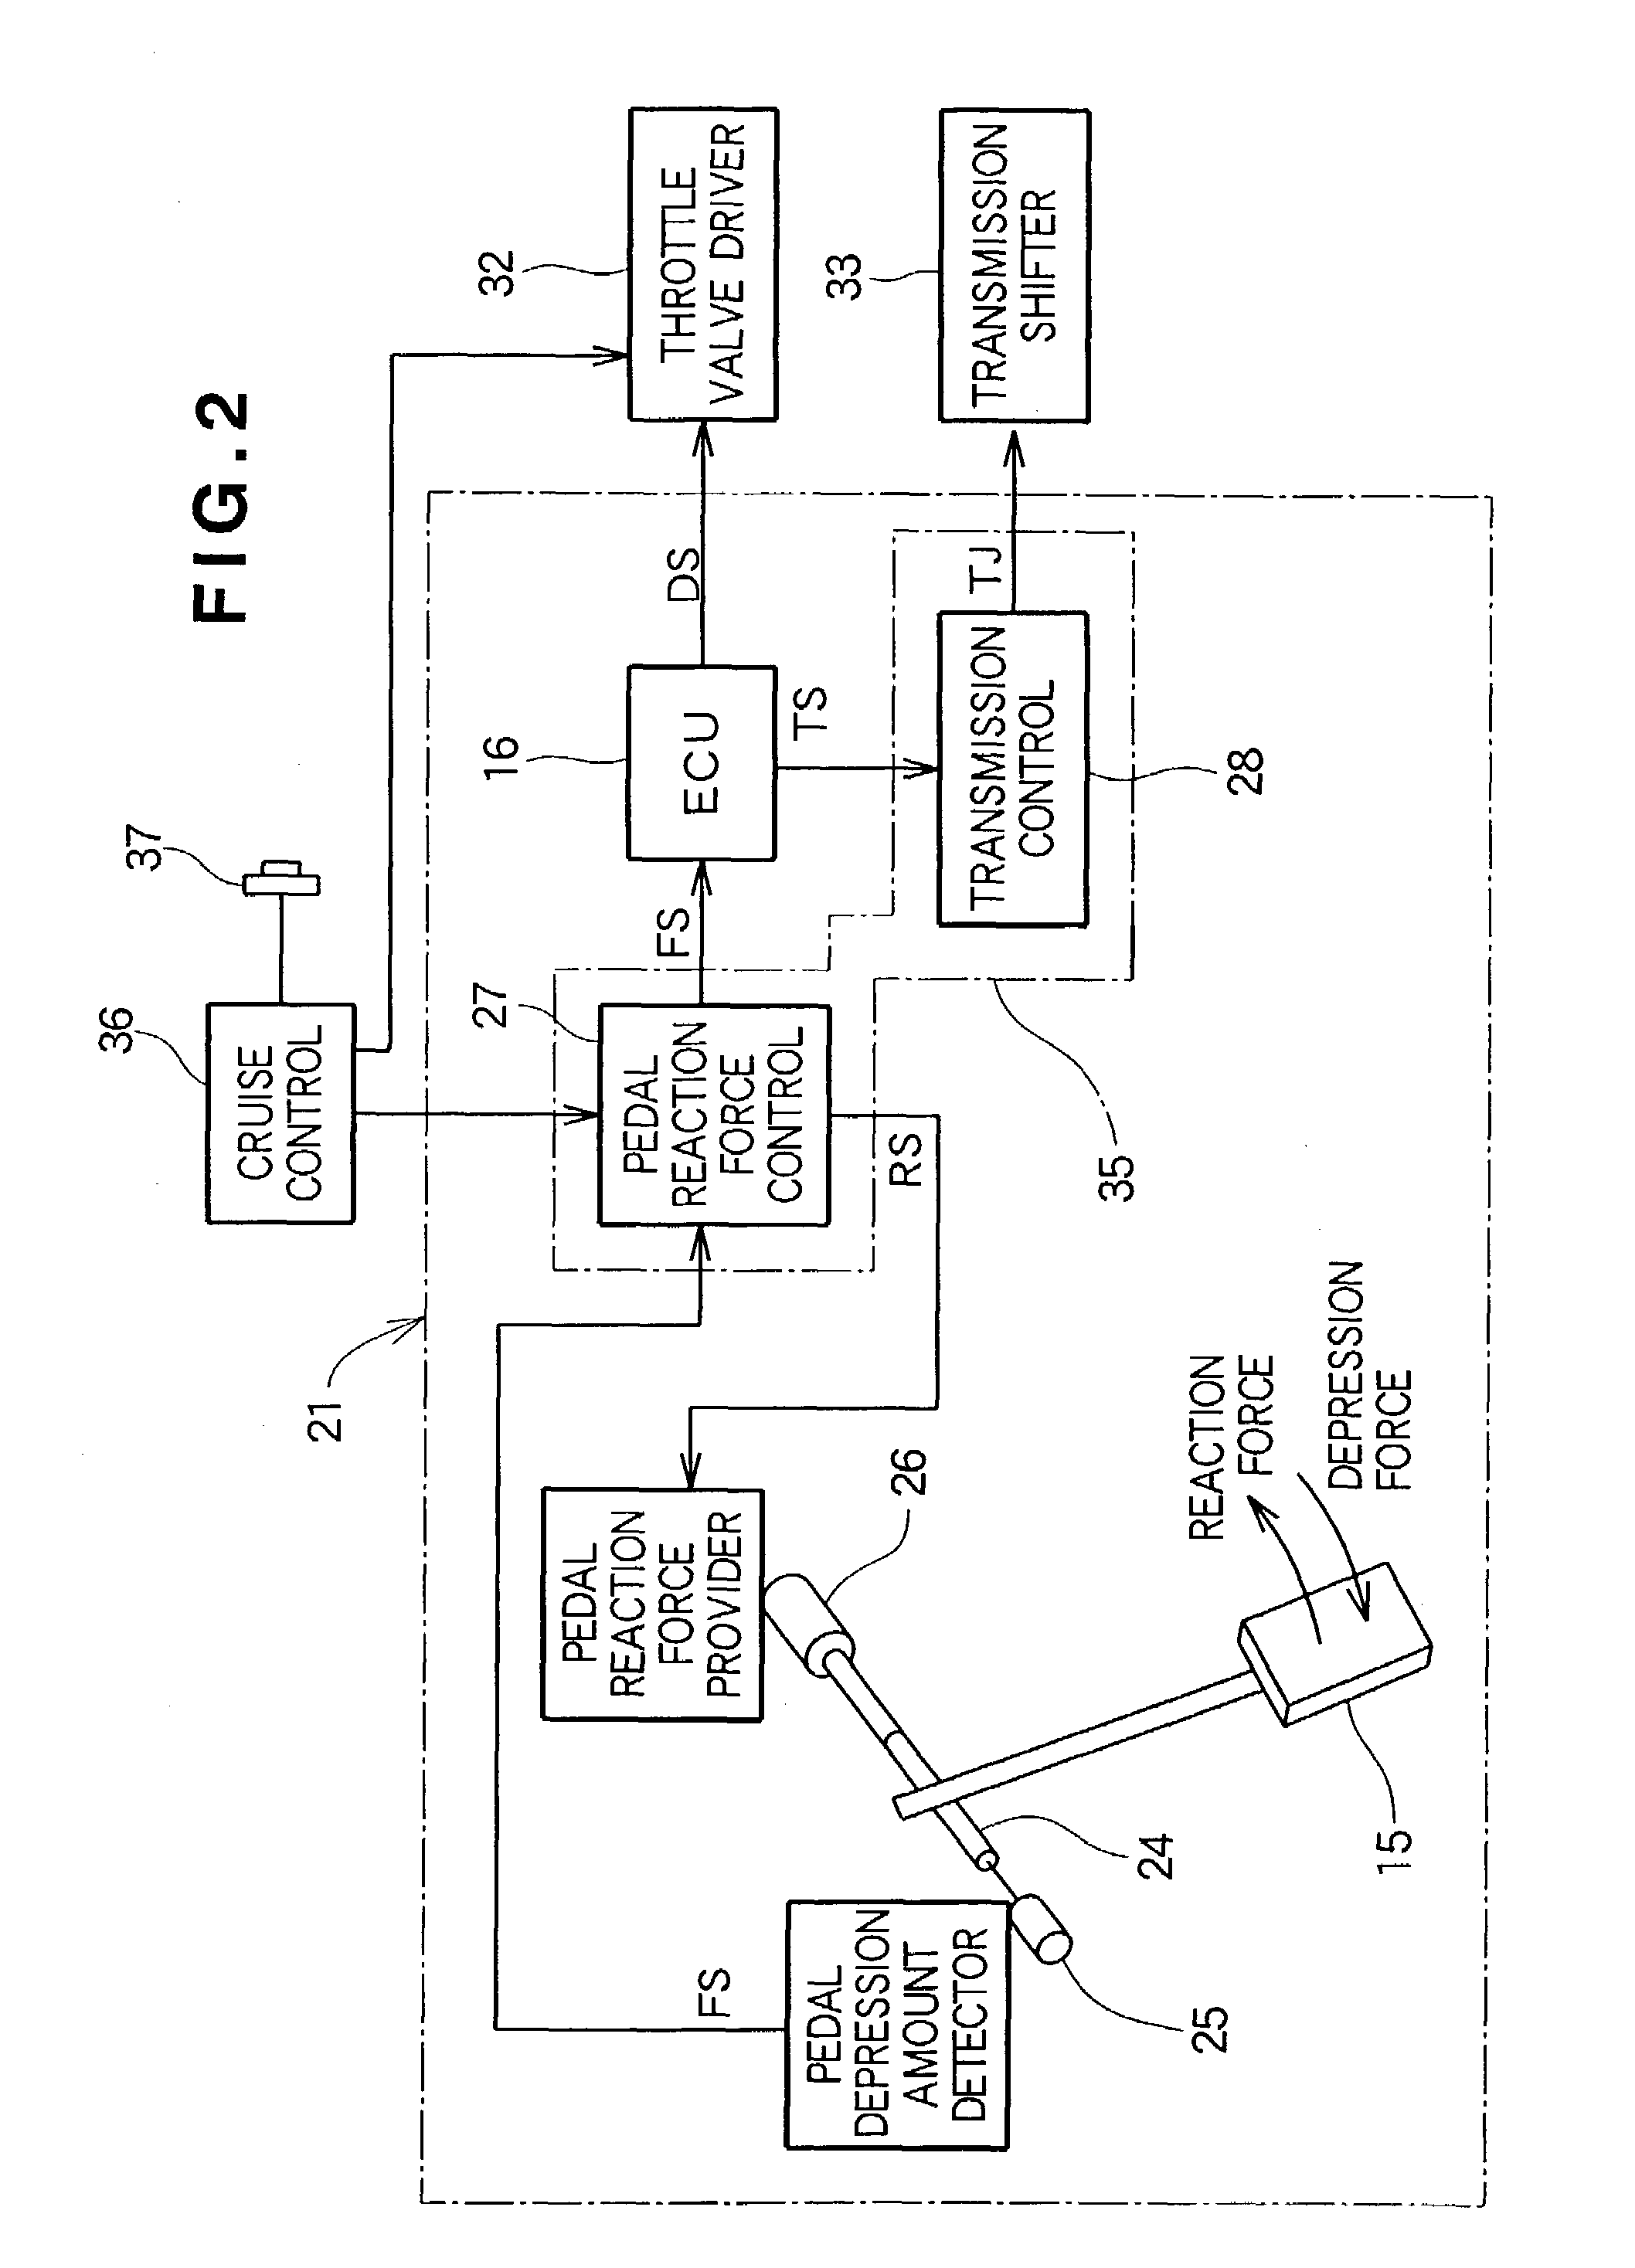 Vehicle accelerator pedal device